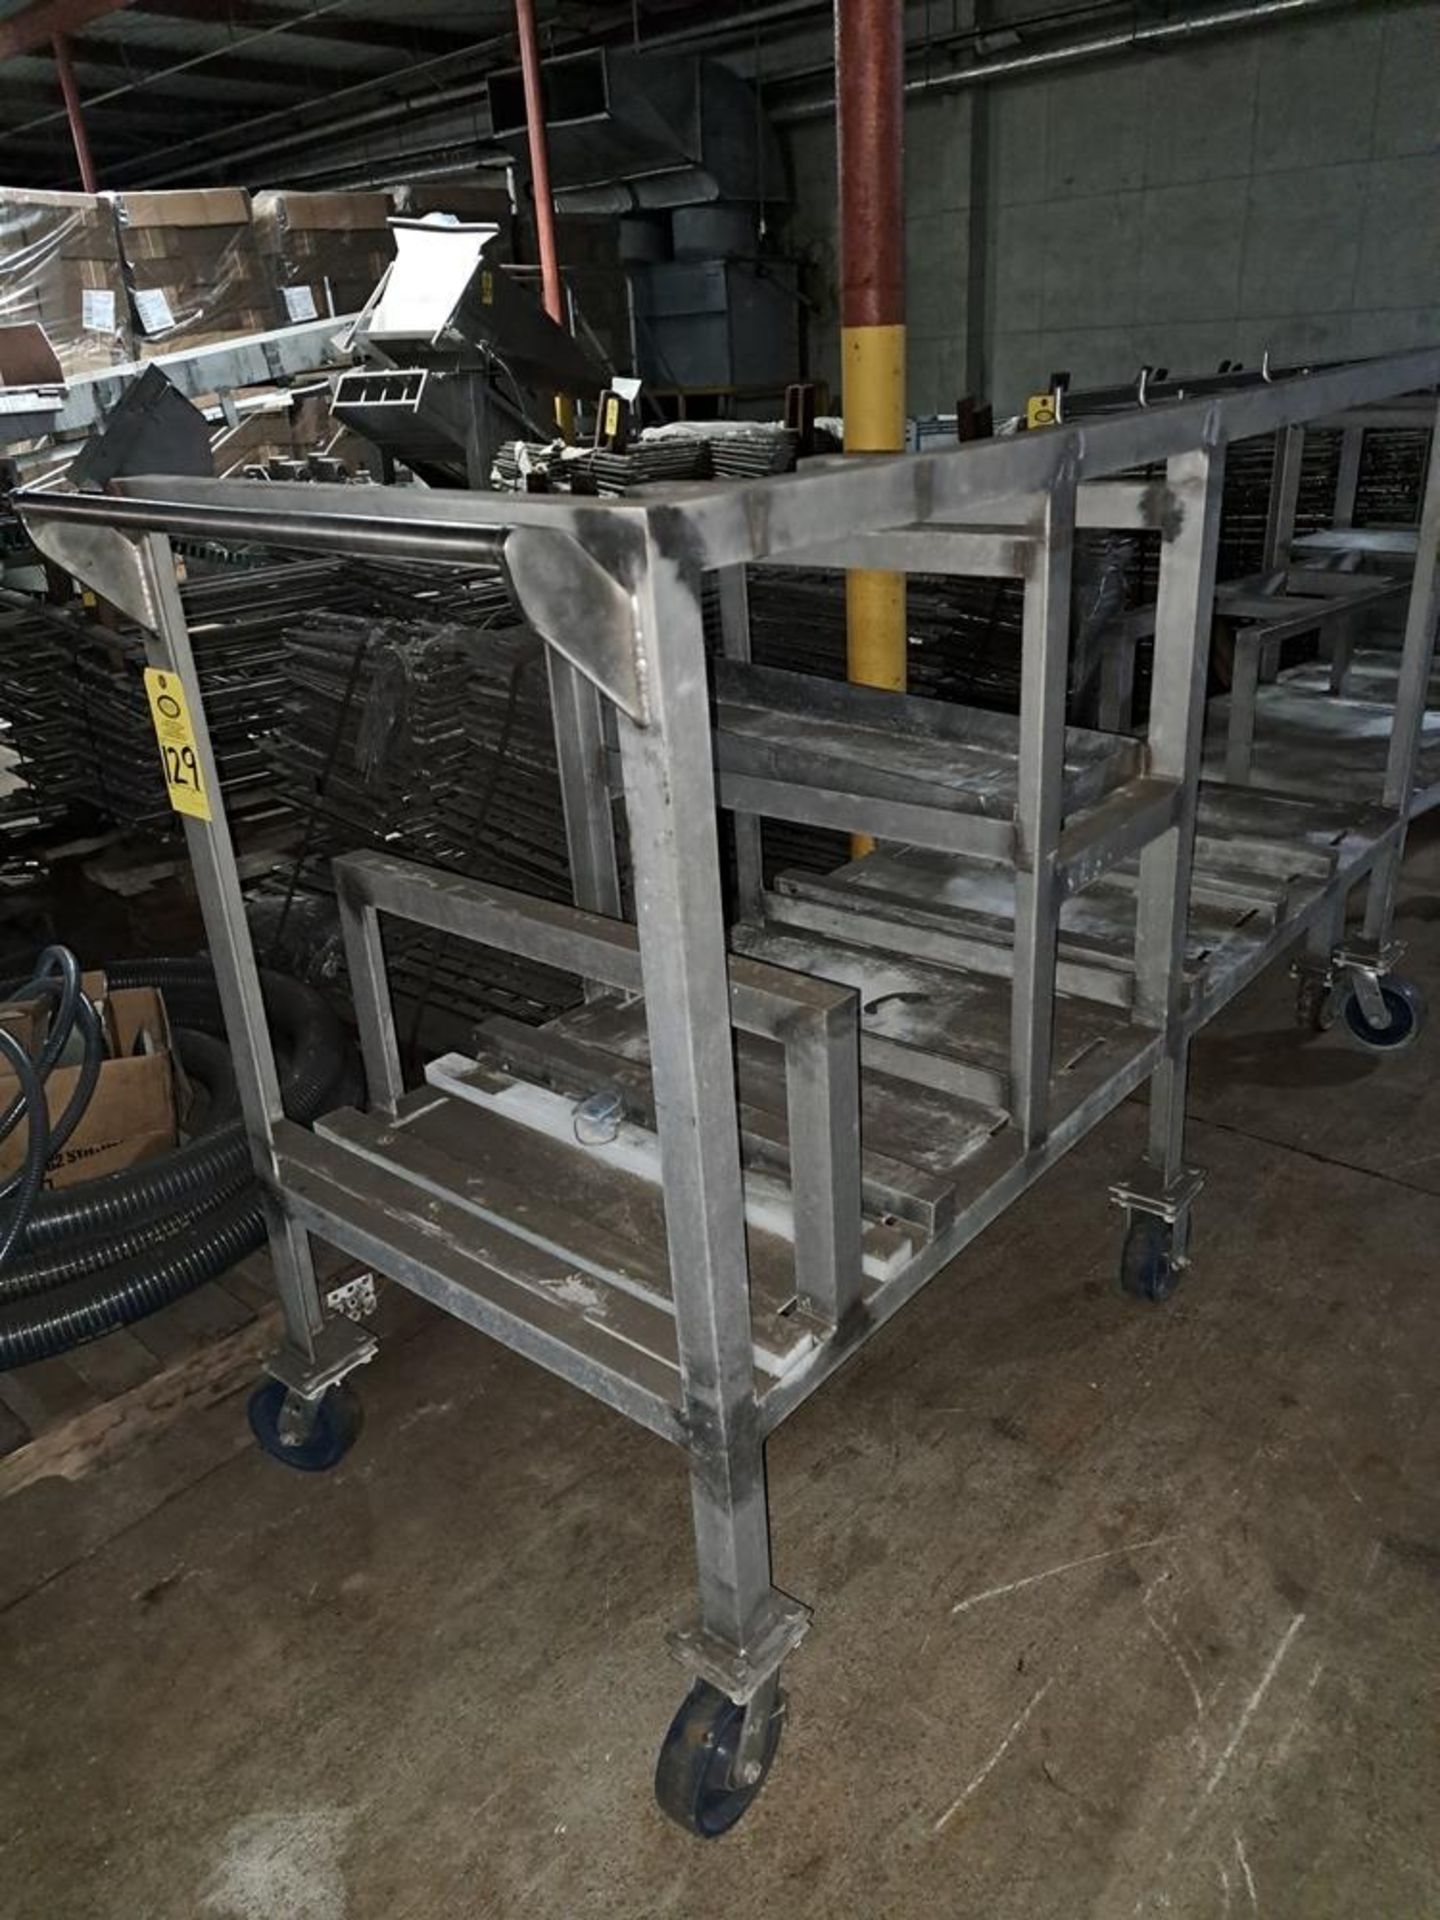 Lot (2) Stainless Steel Parts Carts, 30" W X 80" L: Required Loading Fee $100.00, Rigger-Norm